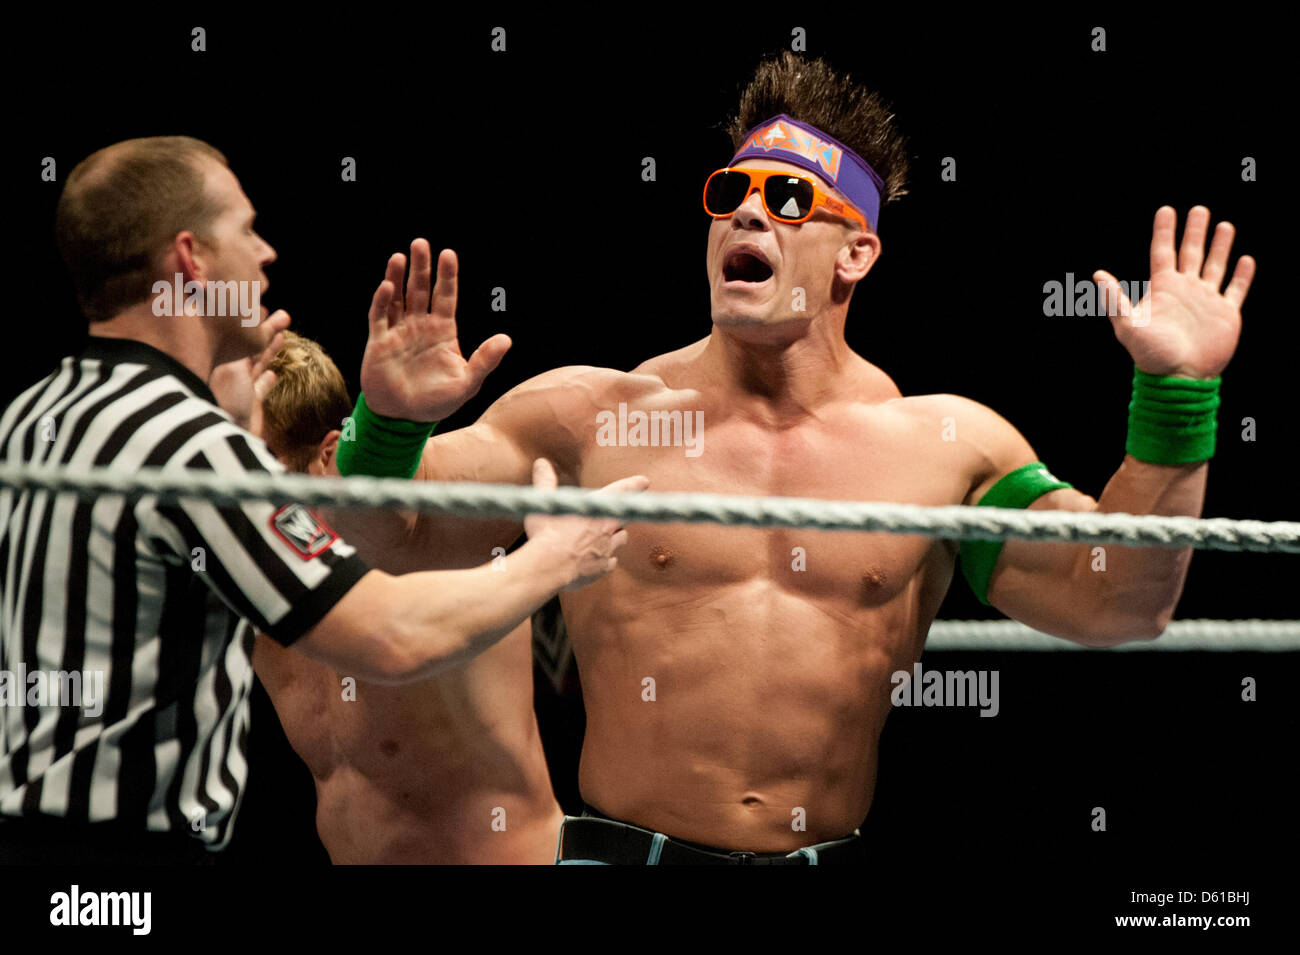 US-wrestler John Cena (R) gestures during an argument with the referee during the RAW WrestleMania Revenge Tour at the o2 World canue in Berlin, Germany, 14 April 2012. The WWE (World Wrestling Entertainment) celebrates its 20th German anniversary this April. The first show in Germany was staged in Kiel, Germany, in April 1992. Photo: Sebastian Kahnert Stock Photo